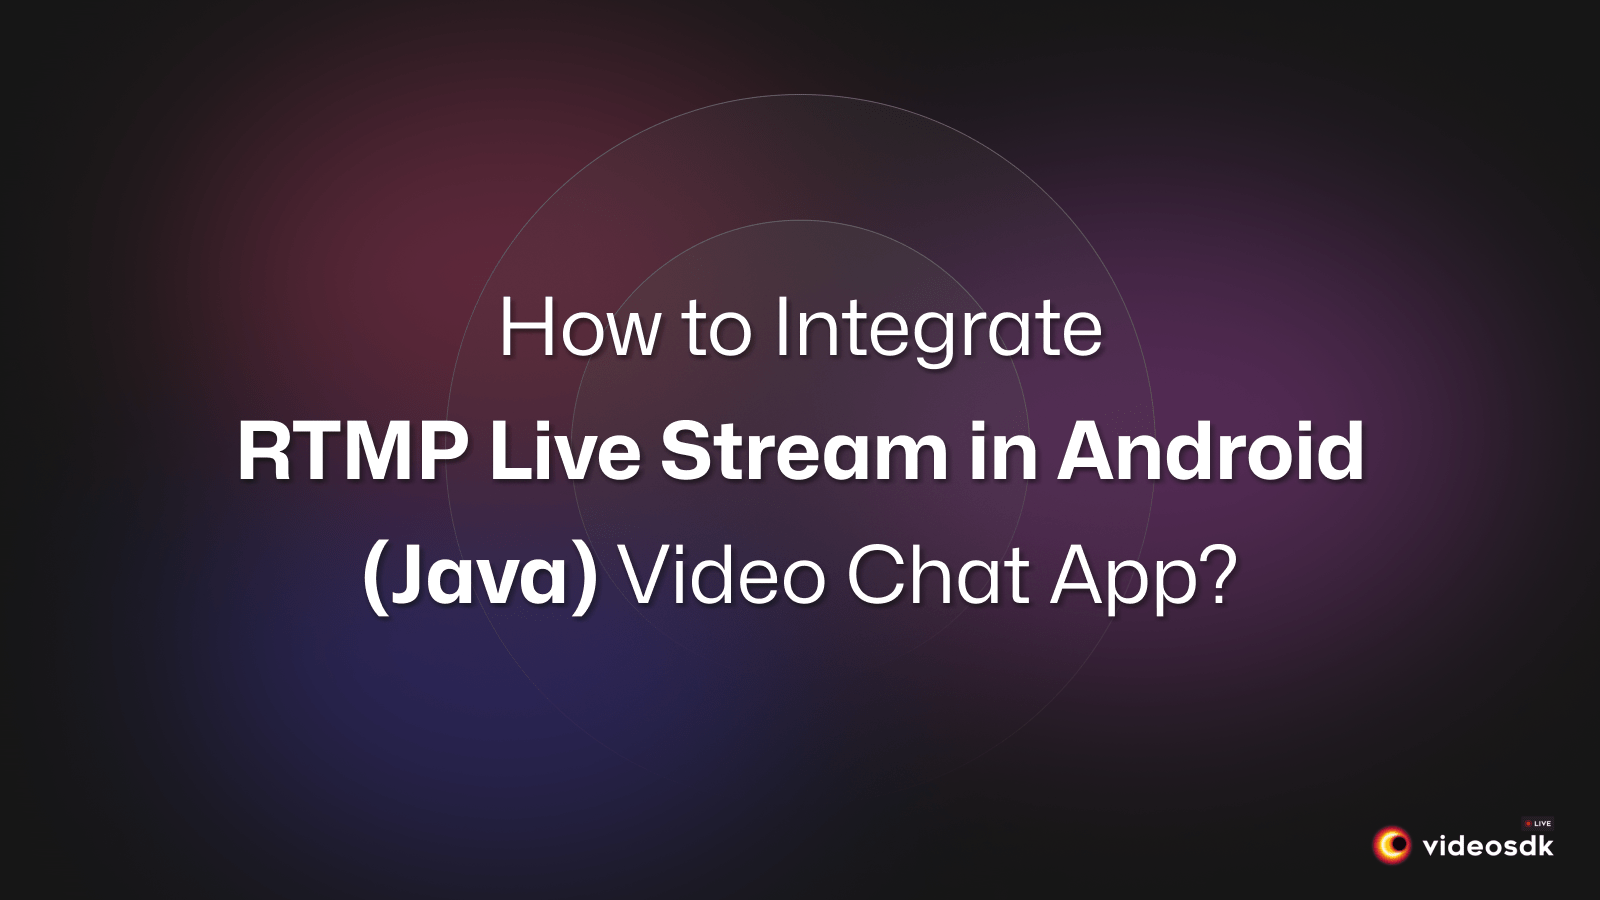 How to Integrate RTMP Live Stream in Android(Java) Video Chat App?